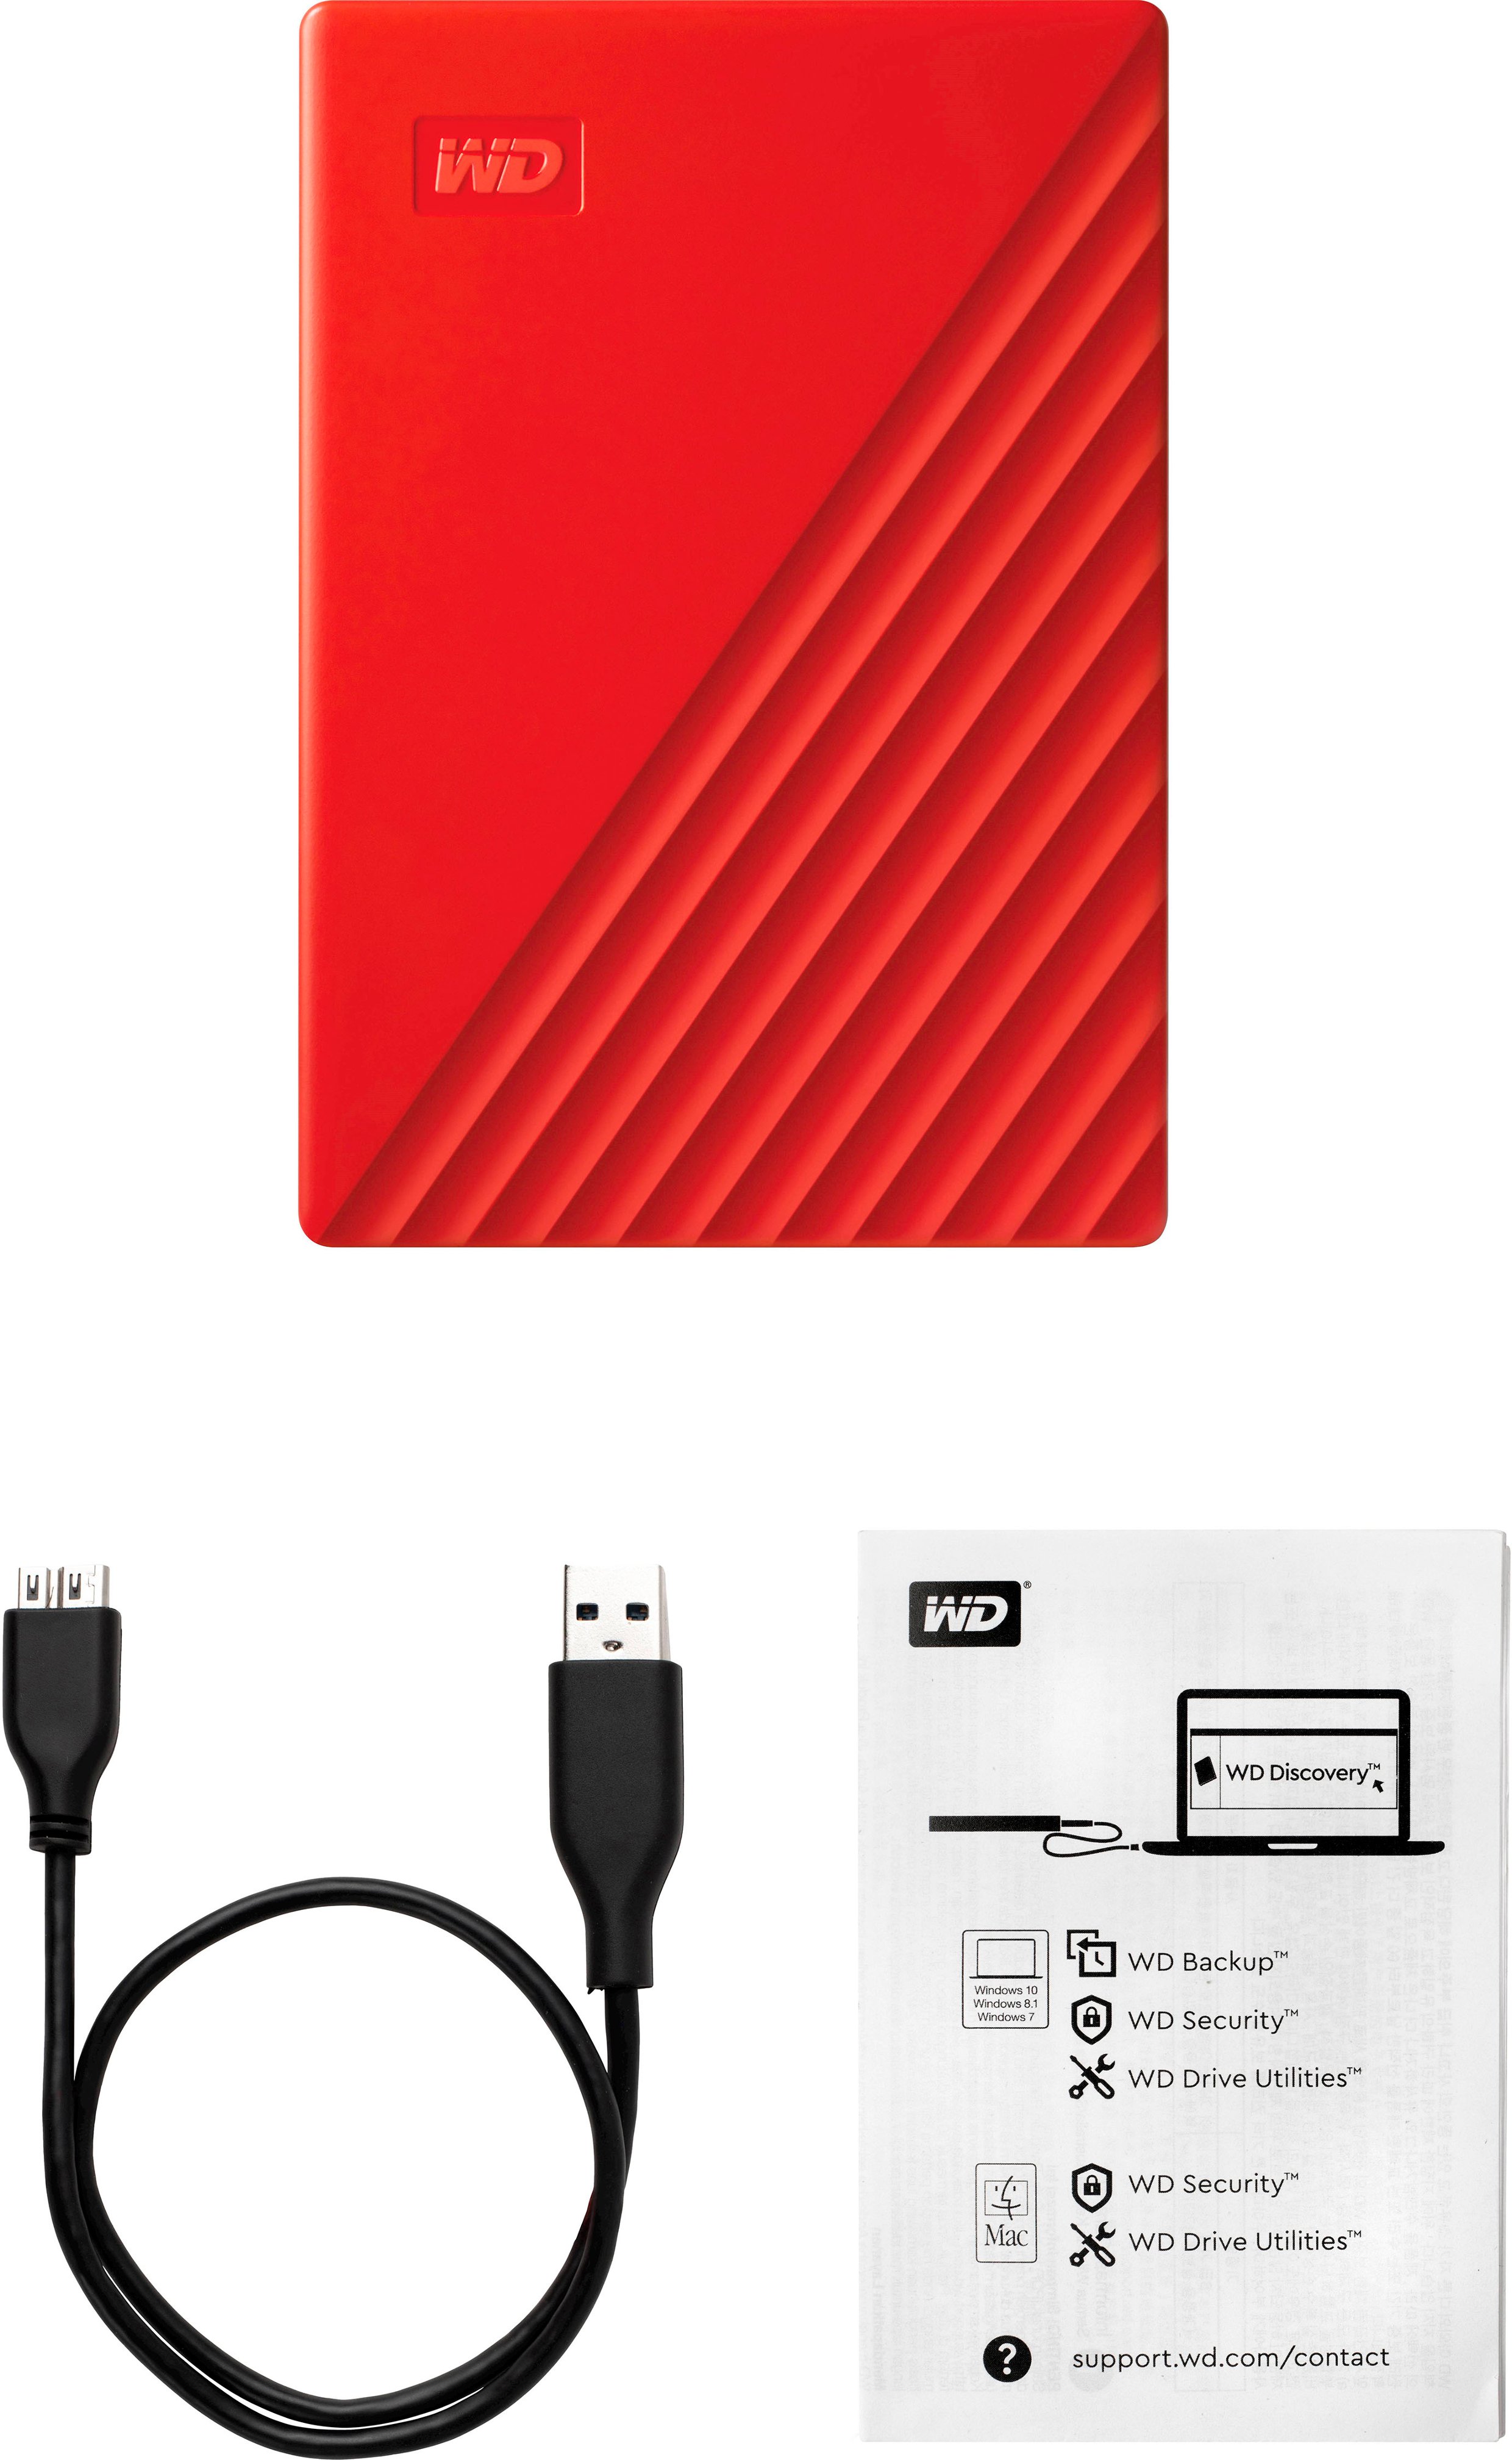 Robe Husk hver for sig WD My Passport 2TB External USB 3.0 Portable Hard Drive Red  WDBYVG0020BRD-WESN - Best Buy